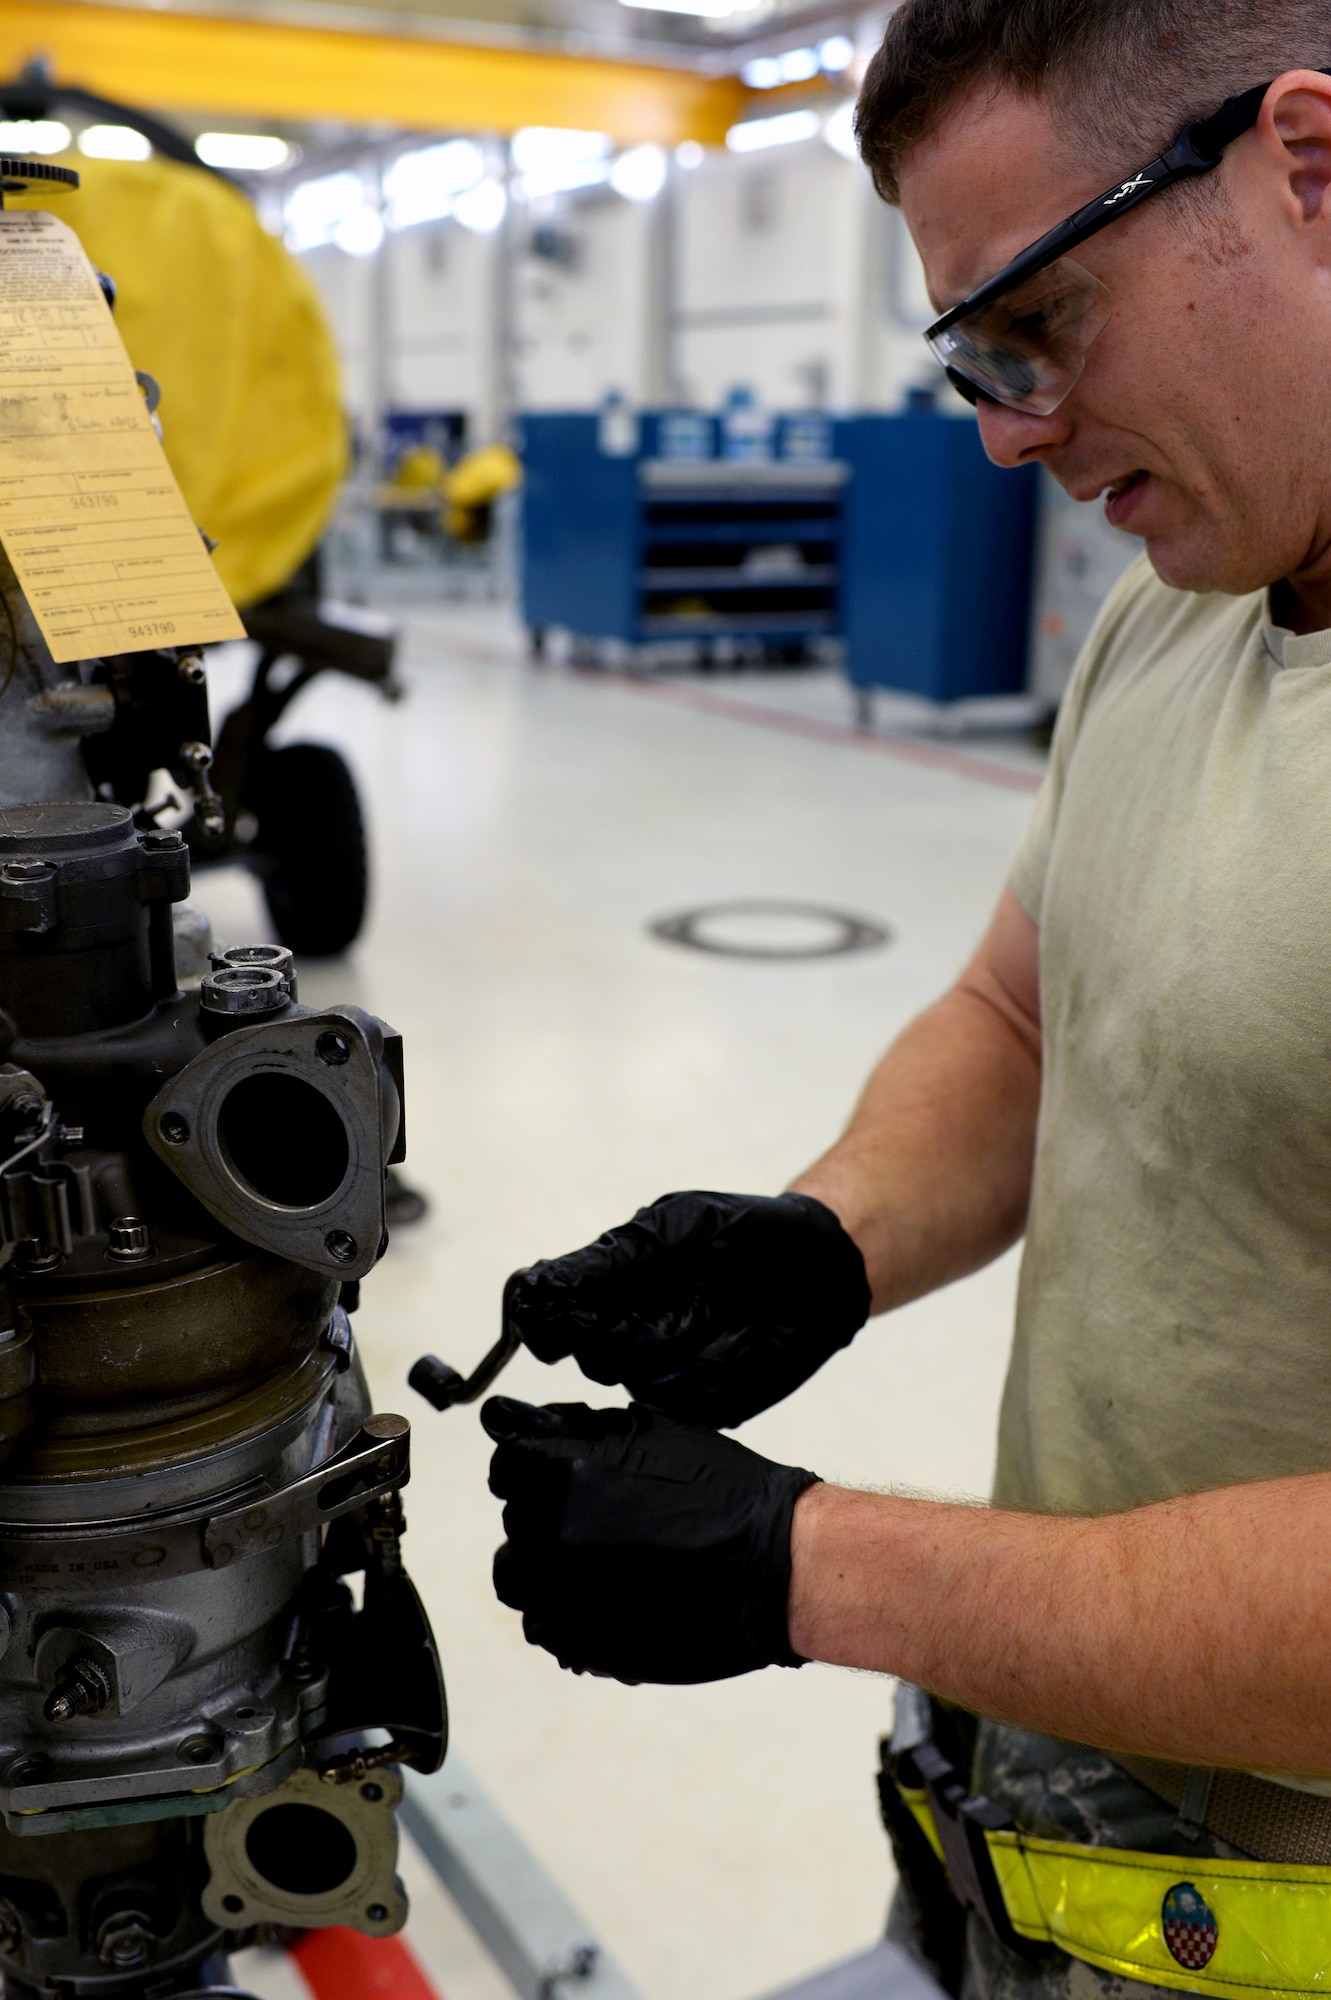 U.S. Air Force Staff Sgt. Willis Jensen, a 52nd Component Maintenance Squadron aerospace propulsion technician from Dana Point, Calif., works on an engine part in the propulsion shop at Spangdahlem Air Base, Germany, Sept. 9, 2014. The propulsion shop repairs components before sending them to a testing cell for a final inspection. (U.S. Air Force photo by Airman 1st Class Timothy Kim/Released)